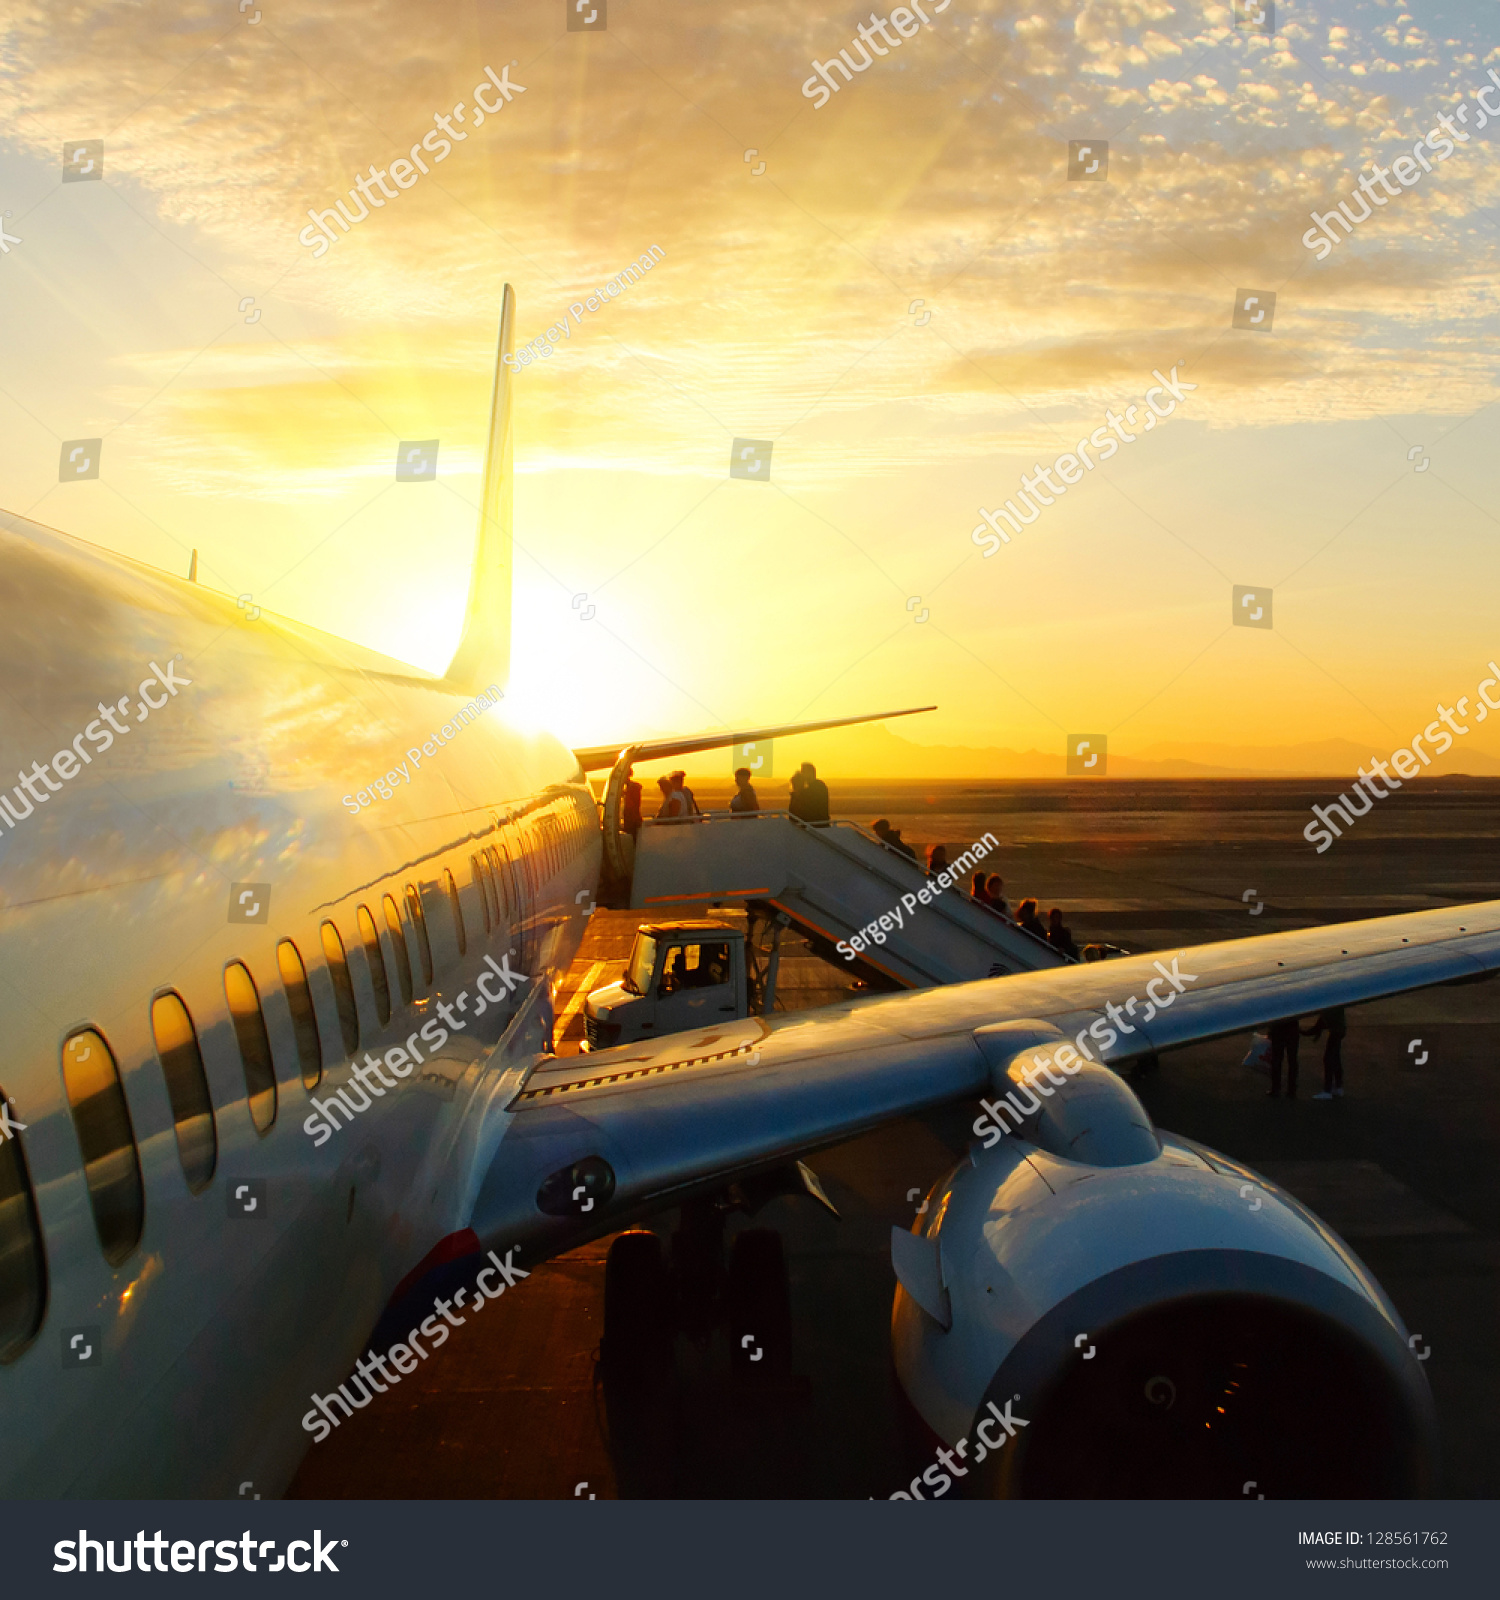 aircraft in airport at sunset #128561762